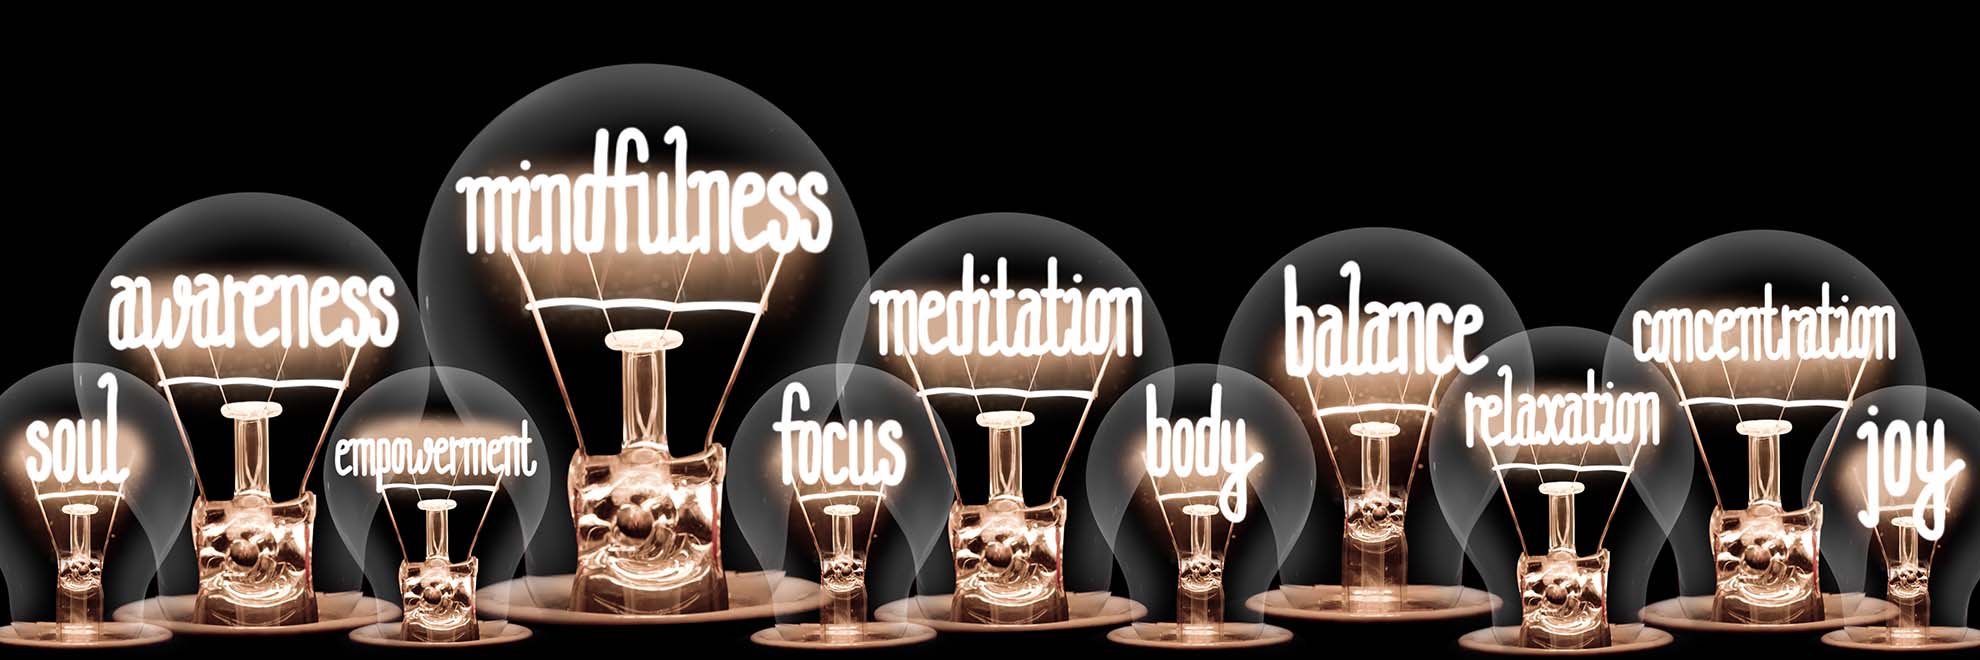 Group of light bulbs with shining fibers in a shape of Mindfulness, Meditation, Balance, Awarness, Body and Soul concept related words isolated on black background.